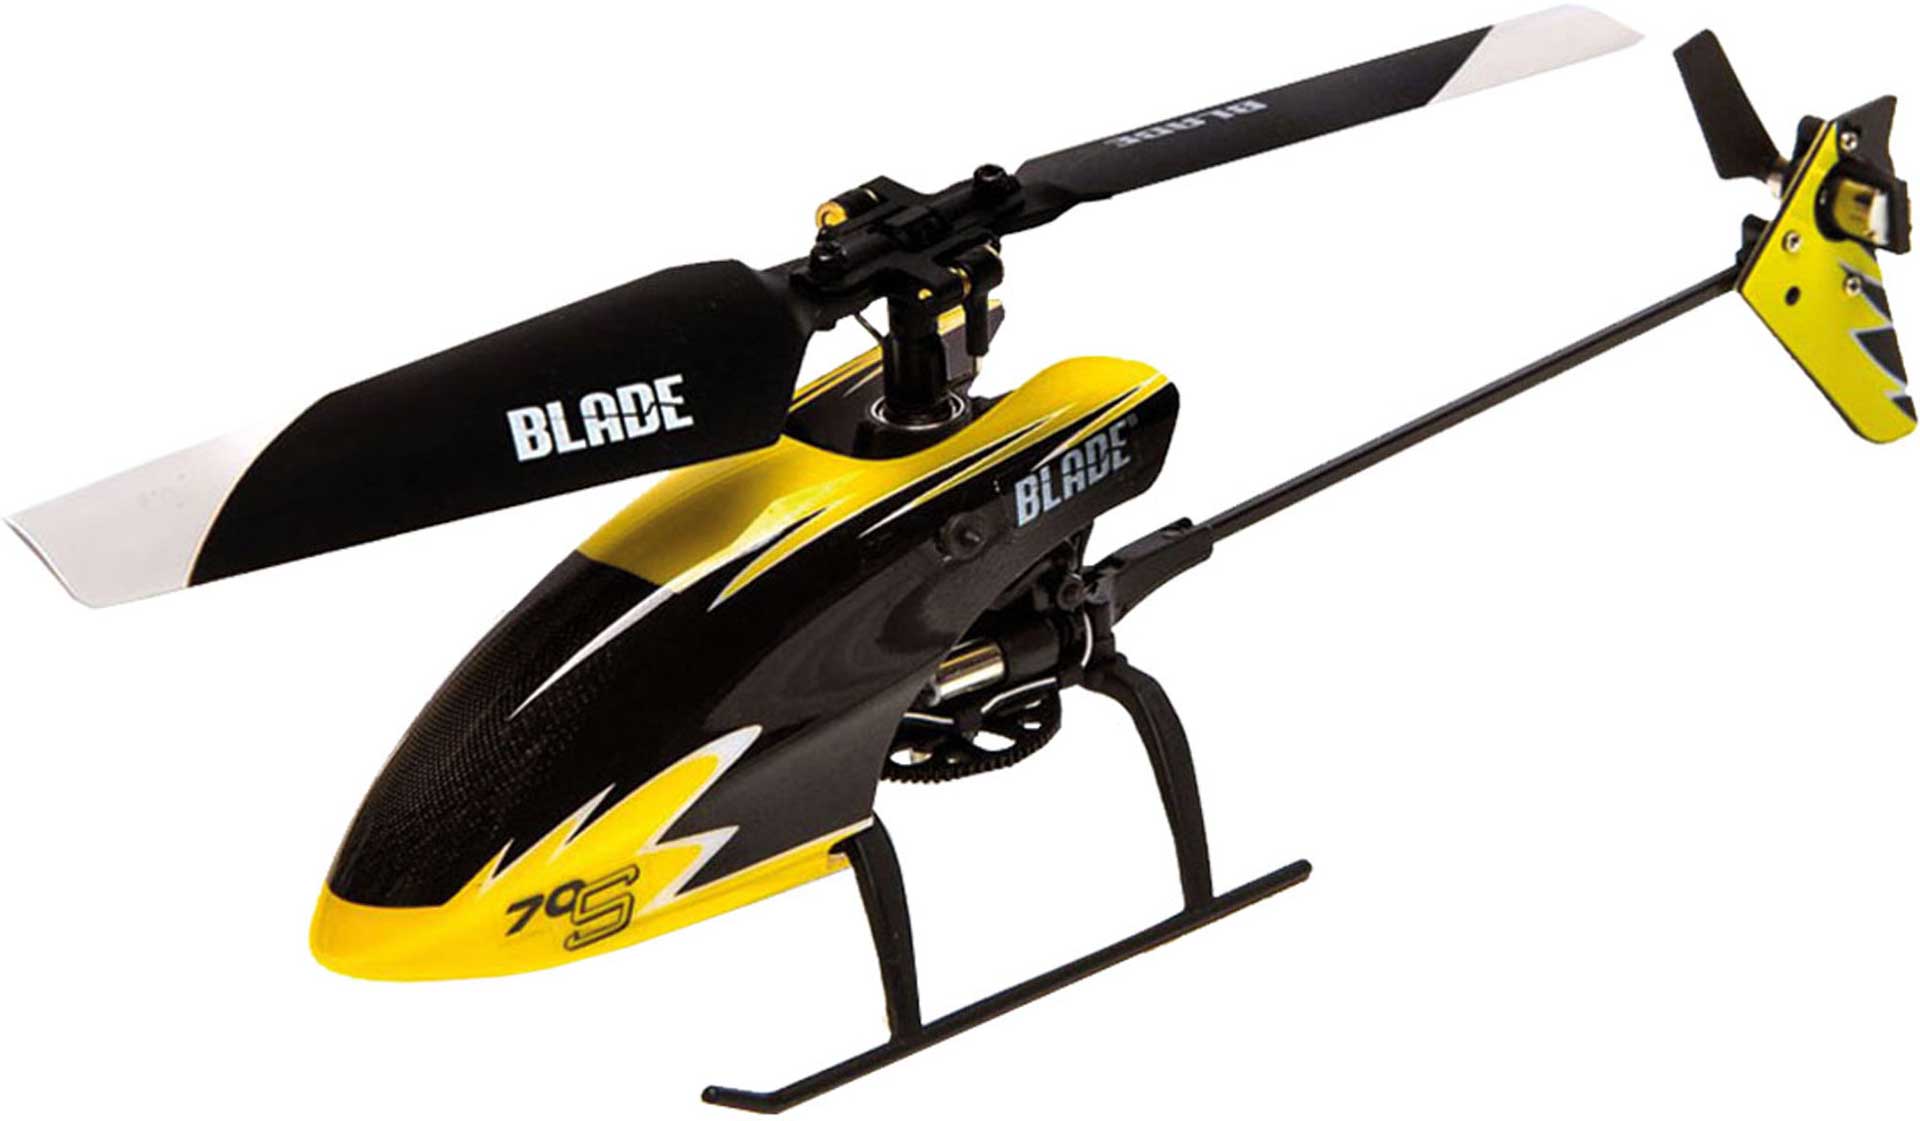 BLADE 70 S READY TO FLY MIT SAFE MODE 2 Hubschrauber / Helikopter